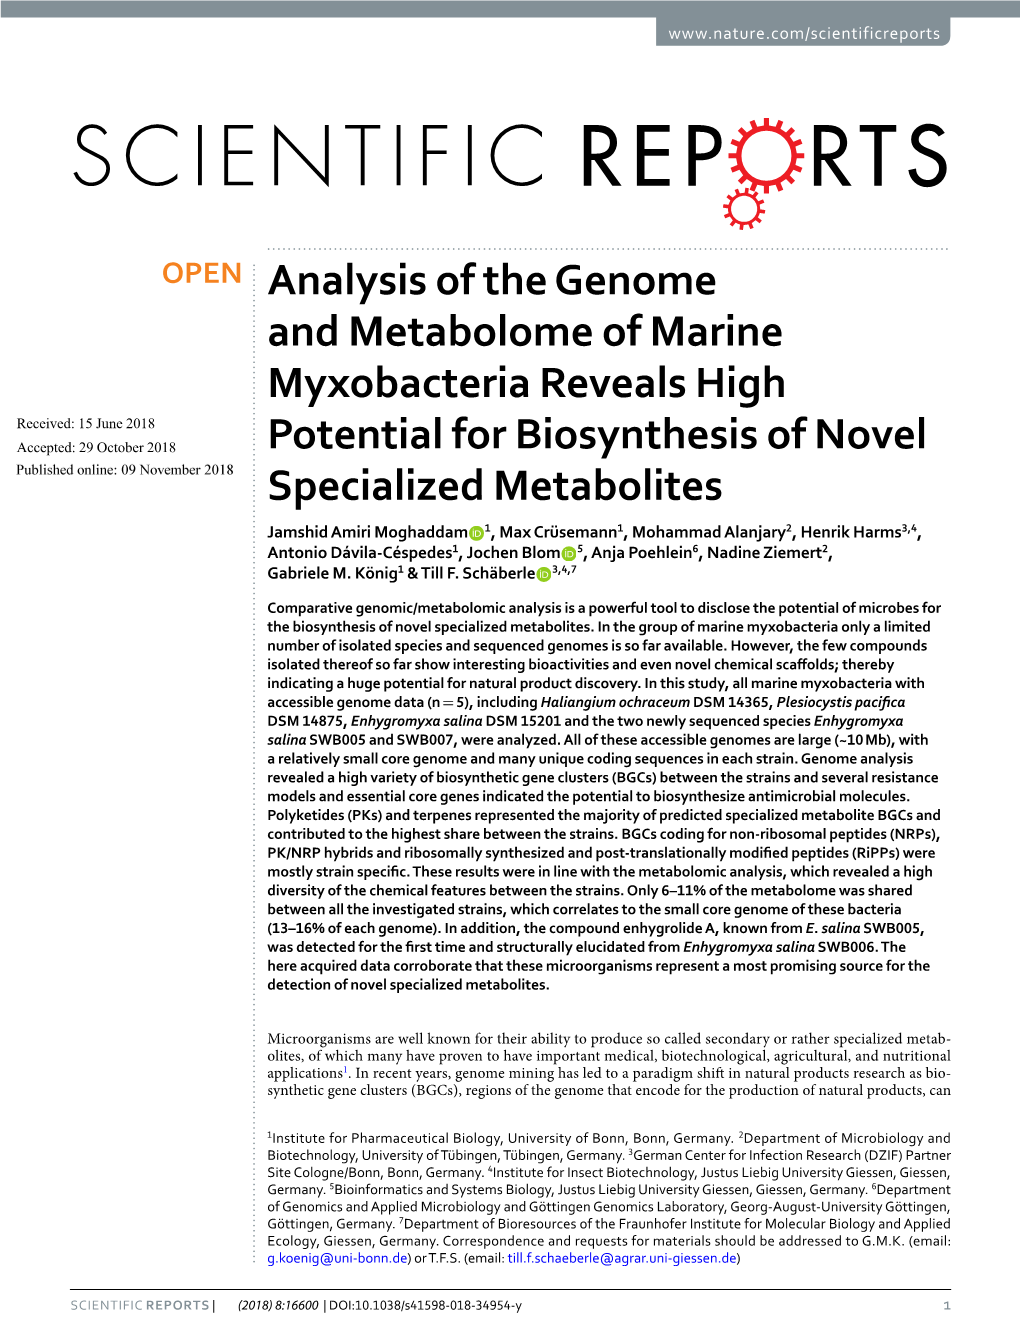 Analysis of the Genome and Metabolome of Marine